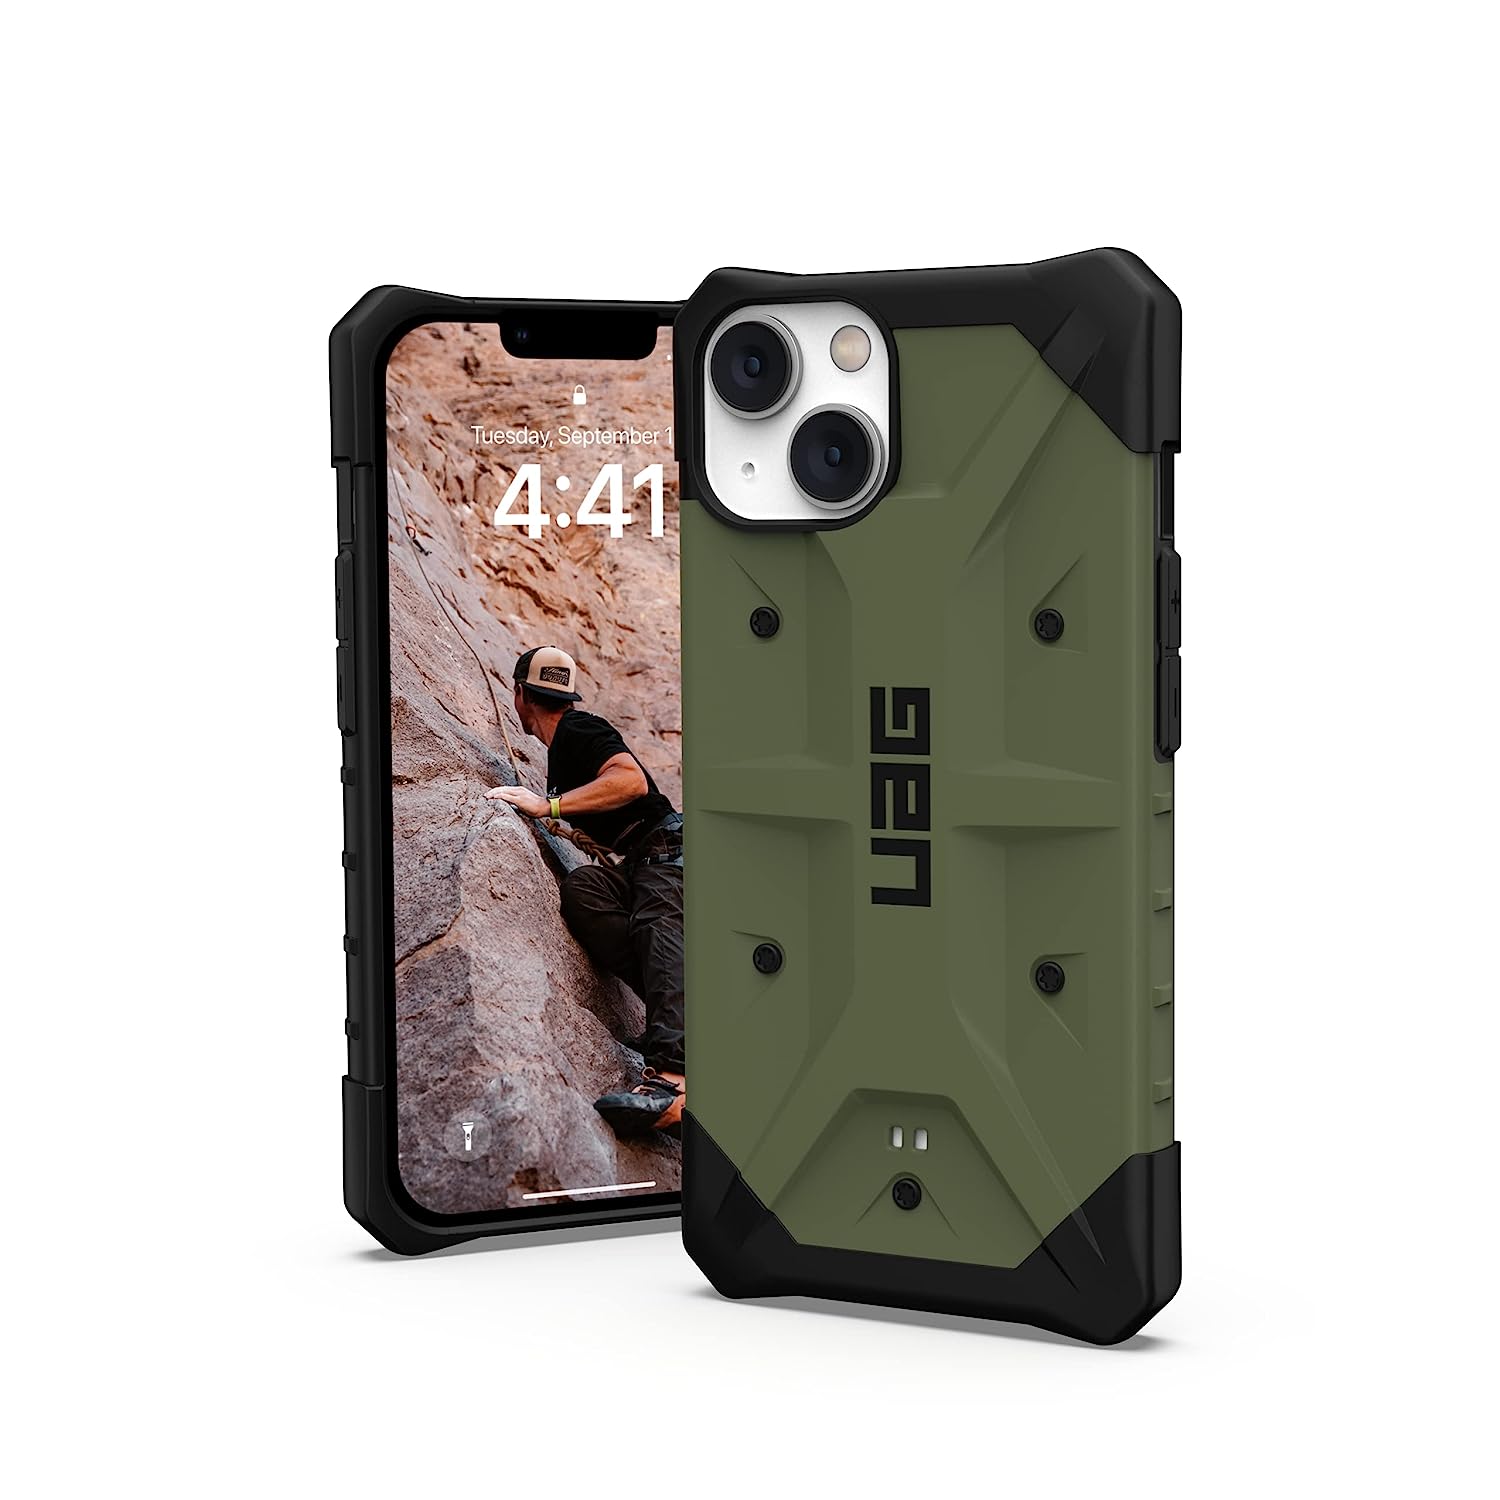 iPhone 13 Armor Cover | Original Urban Armor Slim Fit Rugged Protective Case/Cover Designed For Apple iPhone 13 UAG Olive